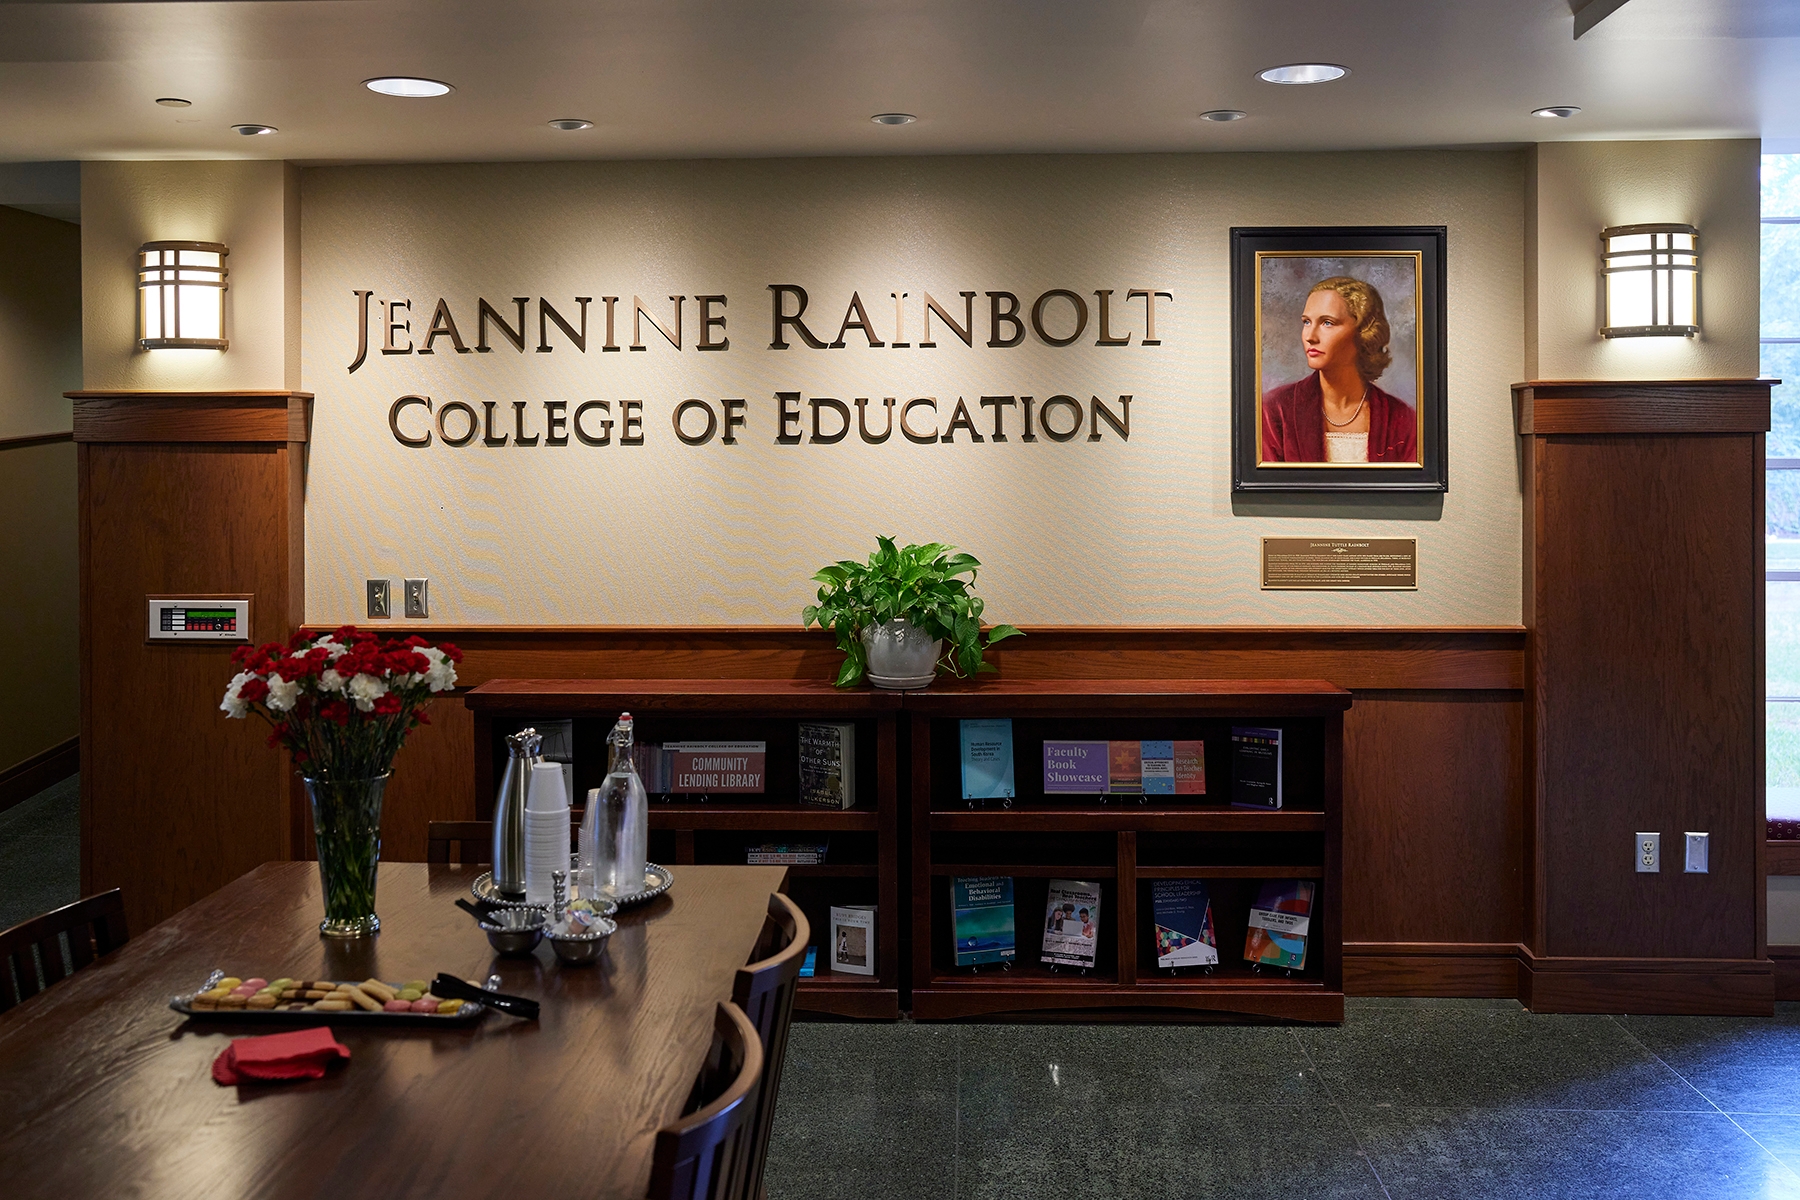 The words Jeannine Rainbolt College of Education on a wall with a portrait of Jeannine Rainbolt next to it.